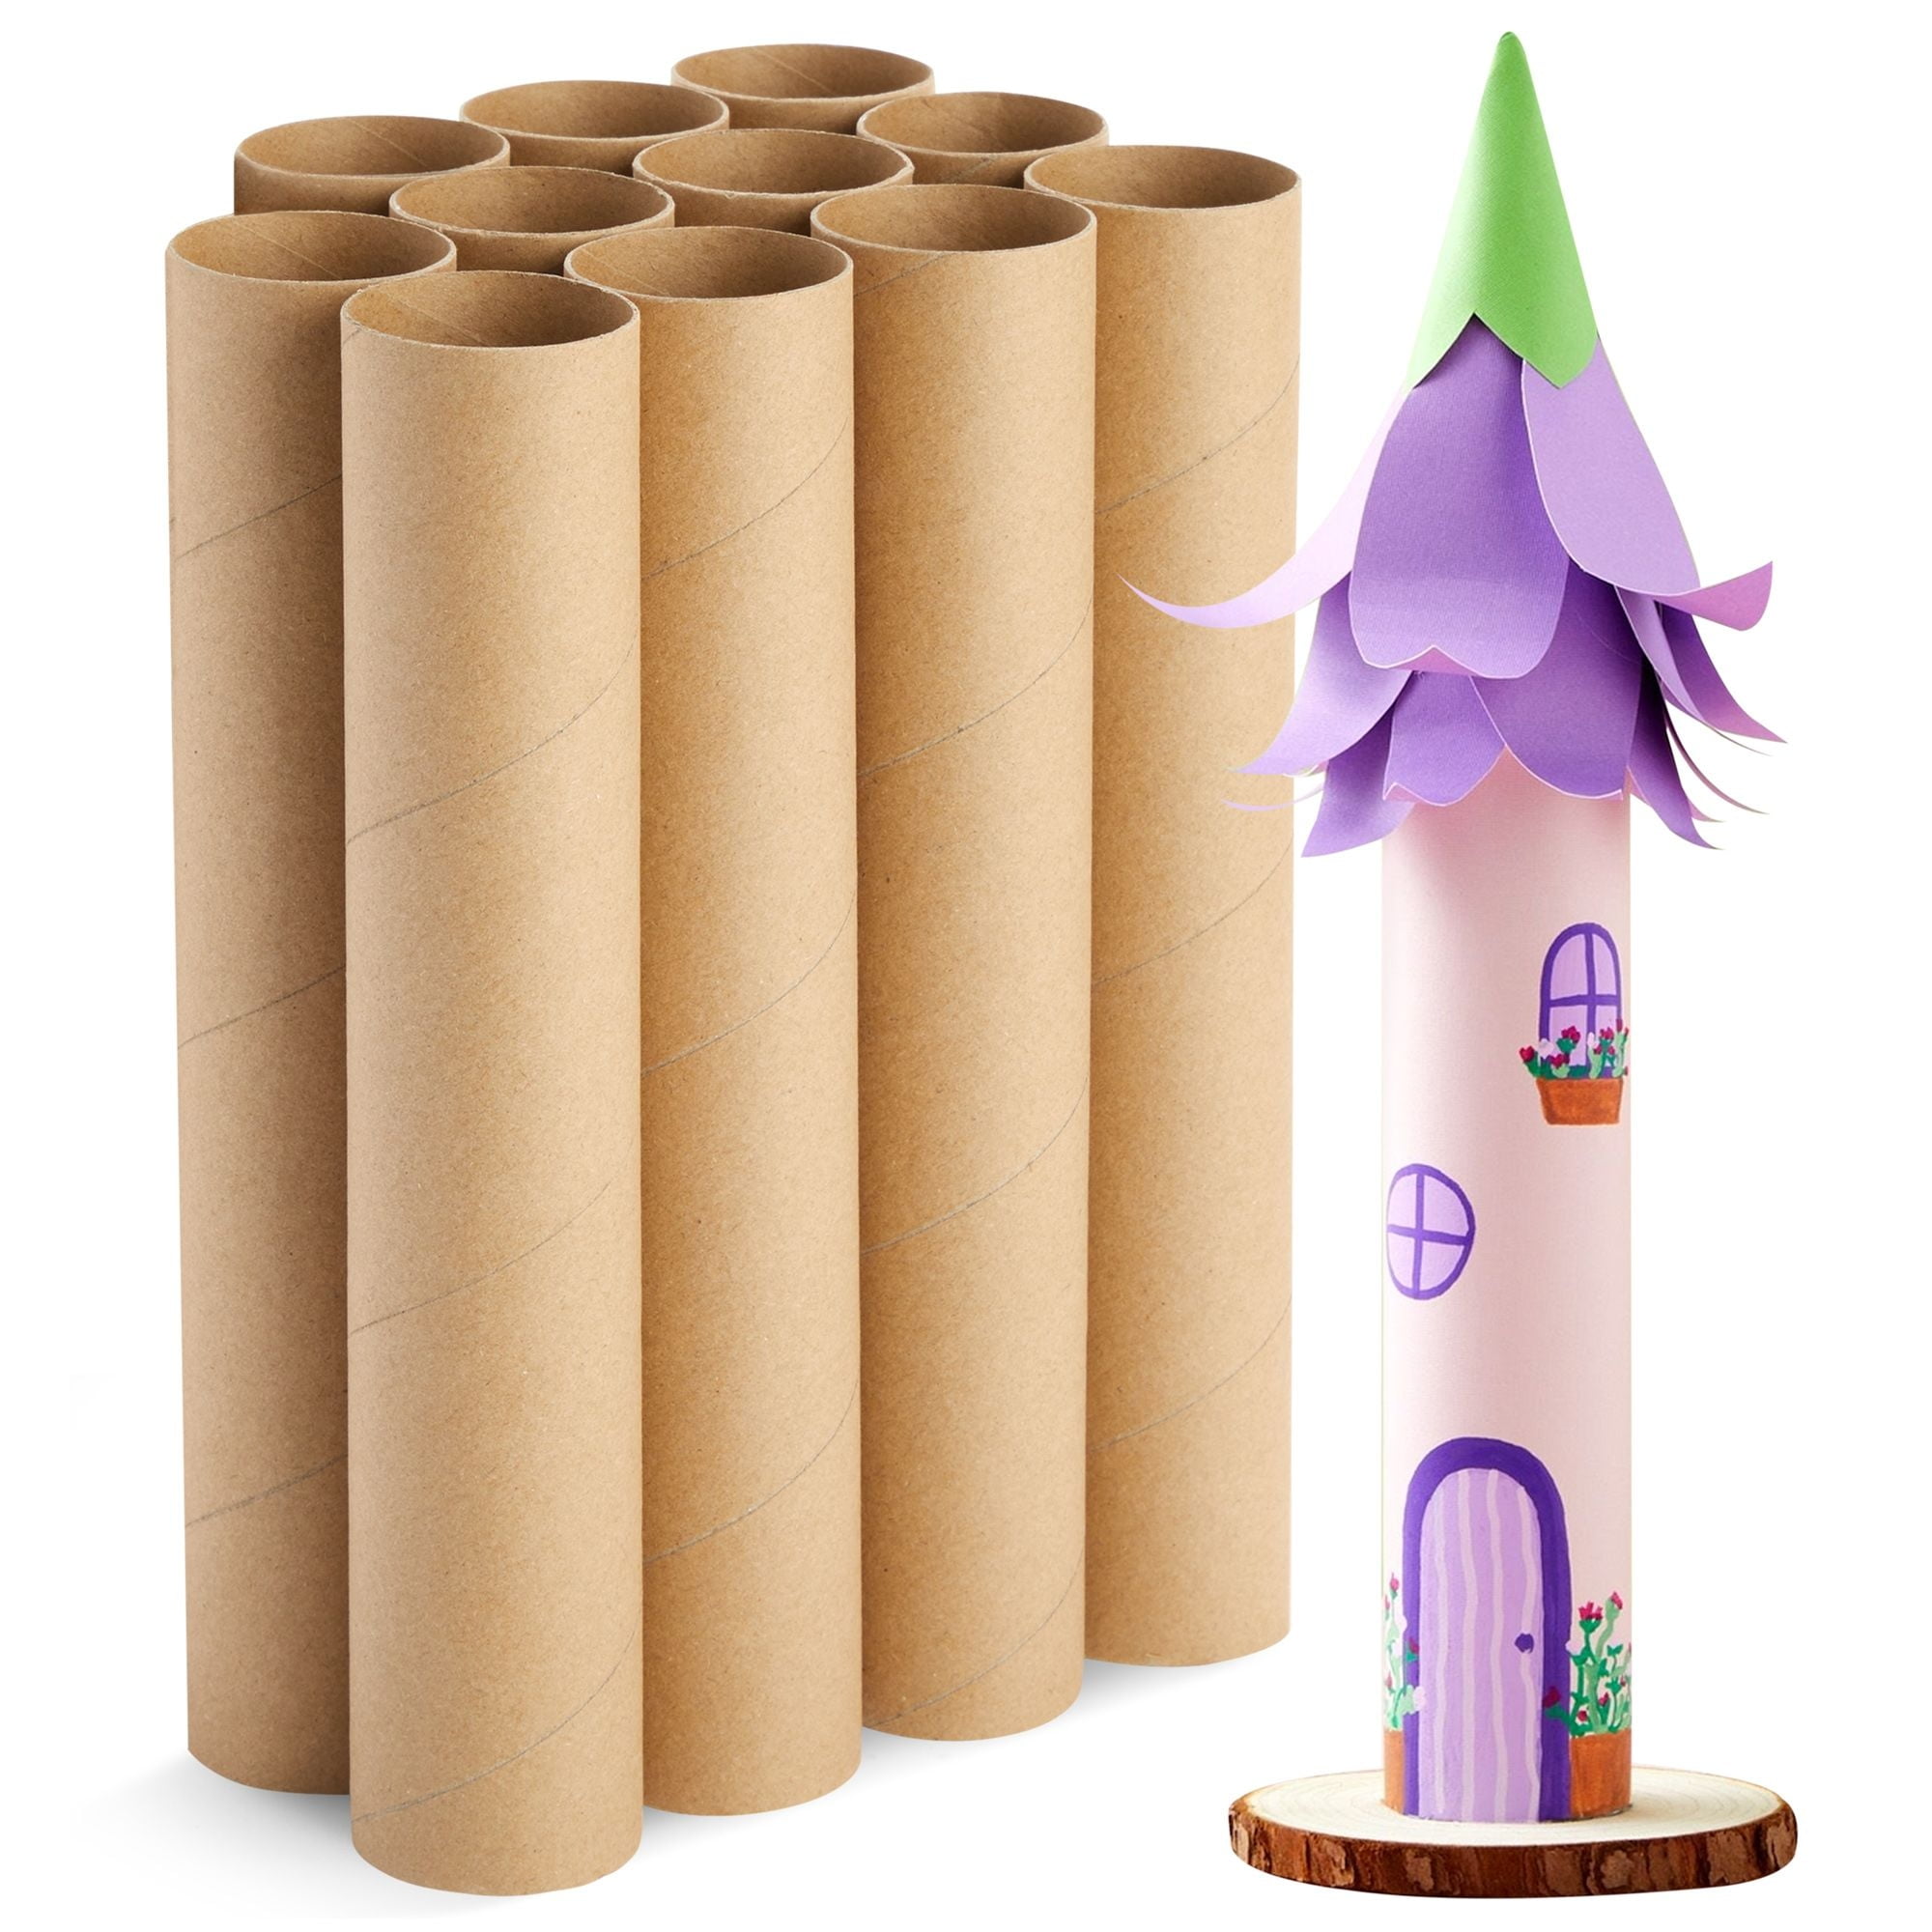 12 Pack Cardboard Tubes for Crafts, Brown Rolls for DIY Projects, Classroom  (1.75 x 10 In) 